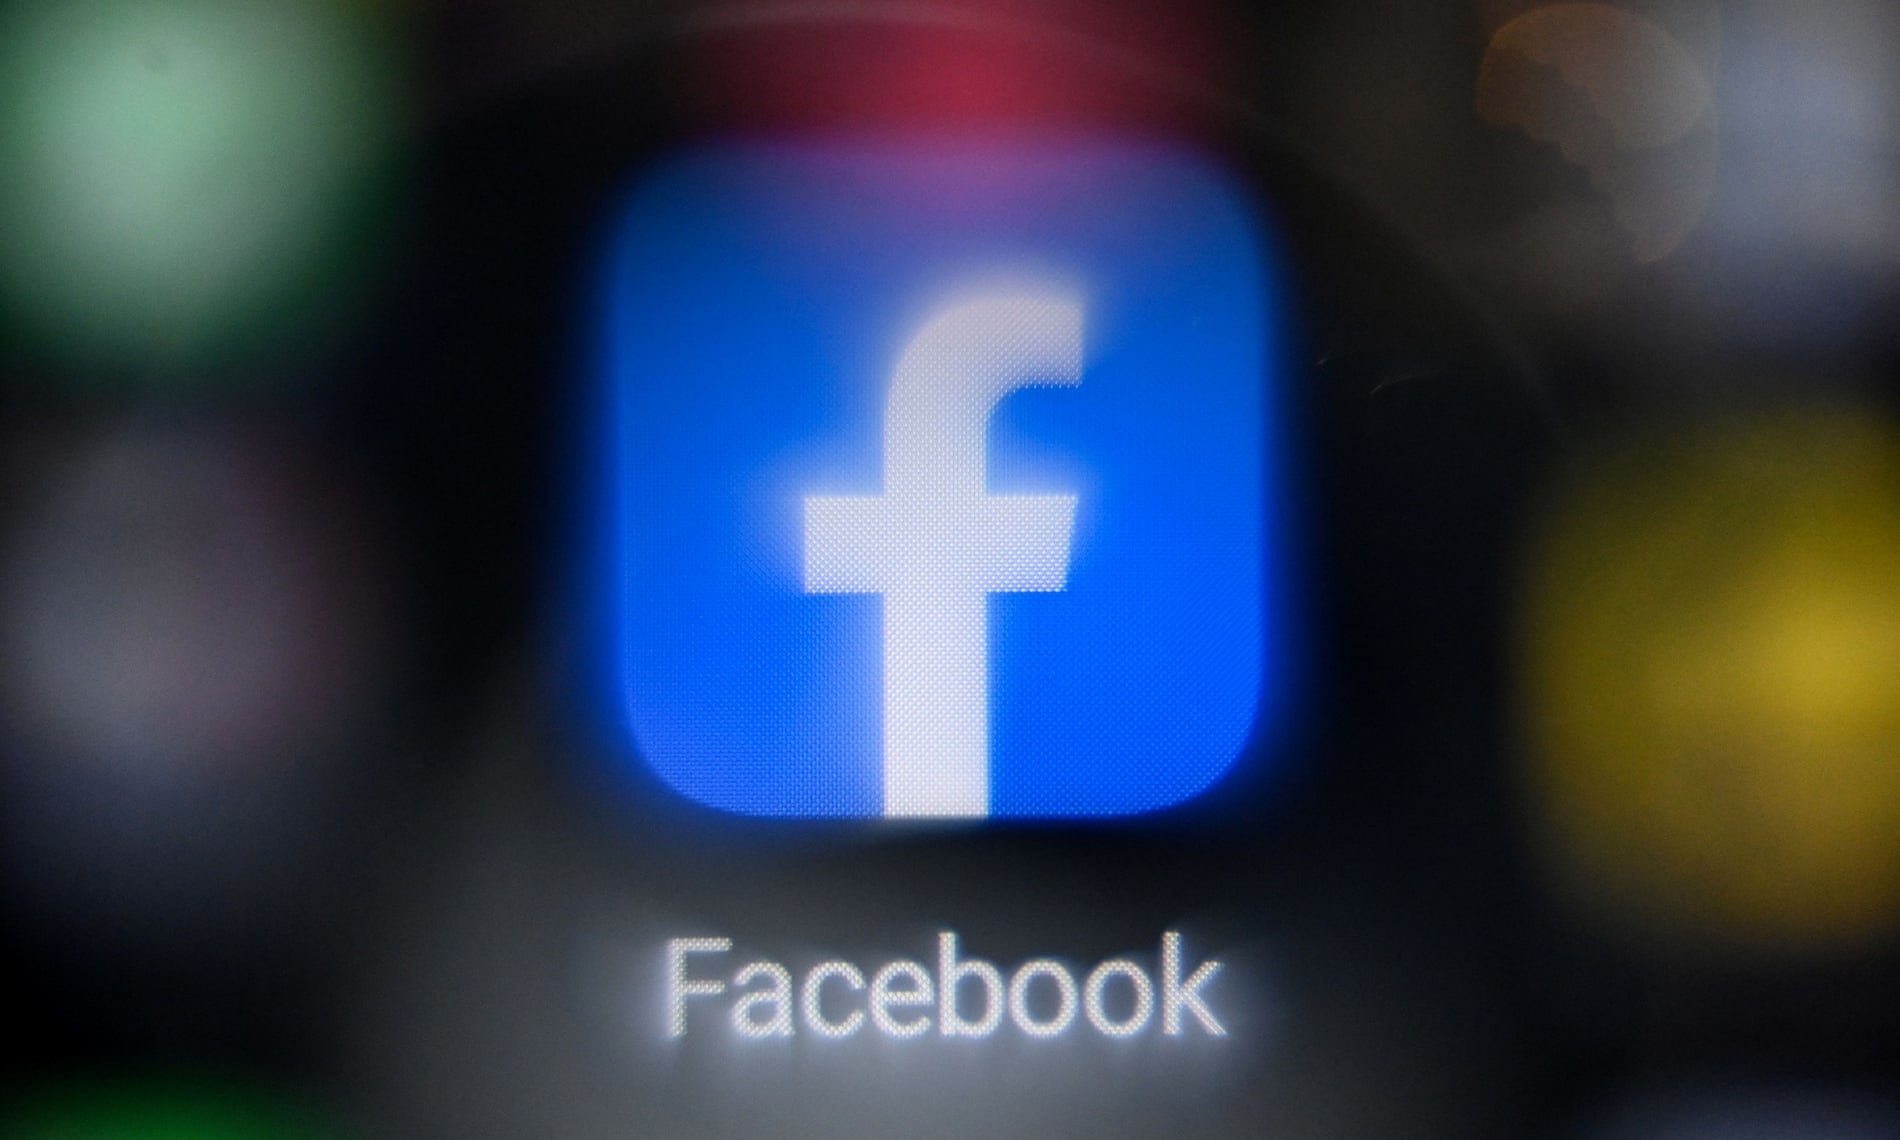 EU Warns Facebook (Meta) to Combat Fake News and Russian Interference Ahead of Parliamentary Elections or Face Consequences